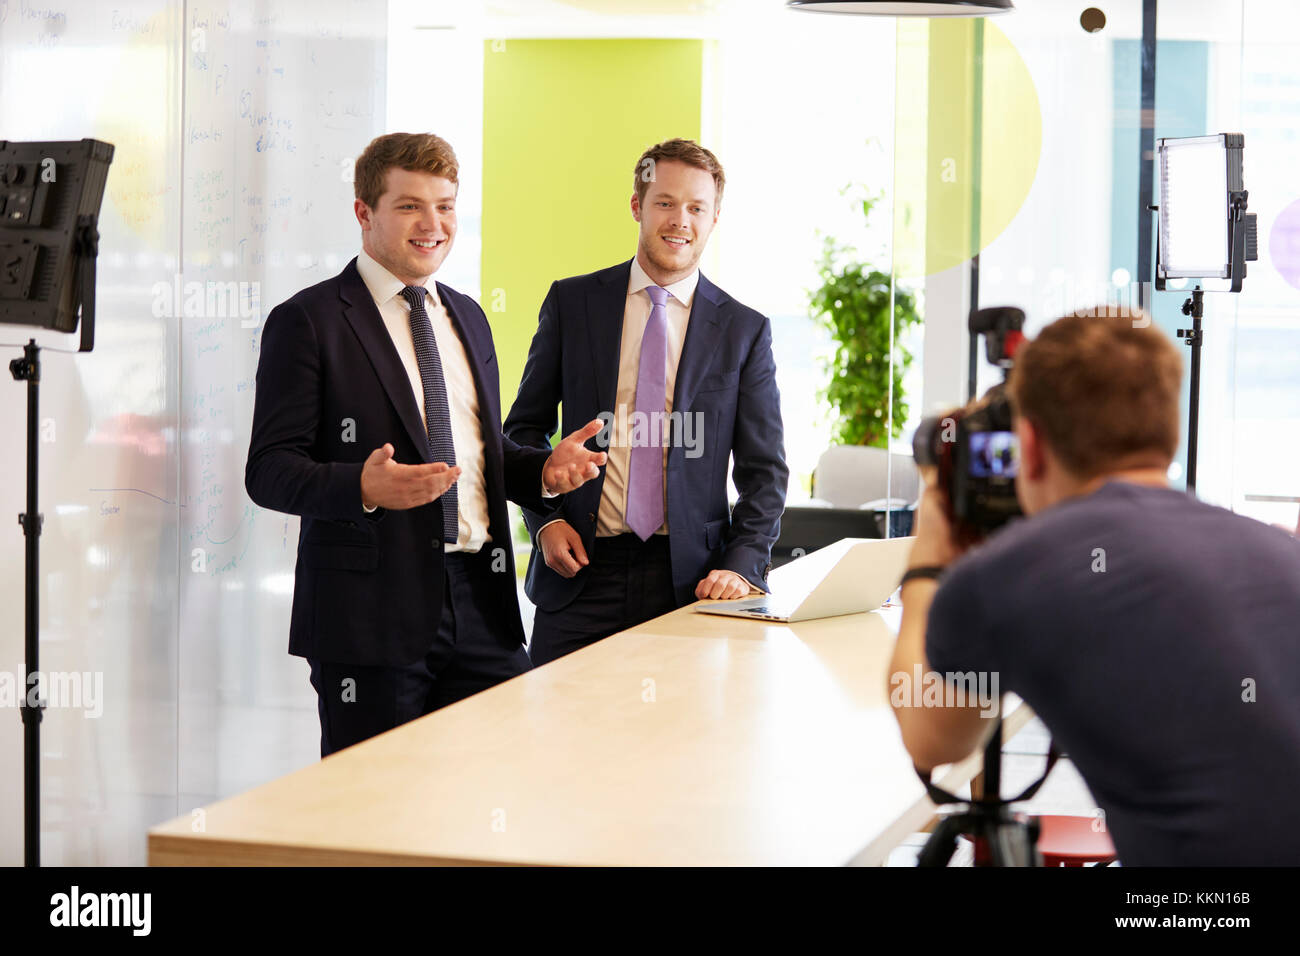 Cameraman and two businessmen making a corporate video Stock Photo